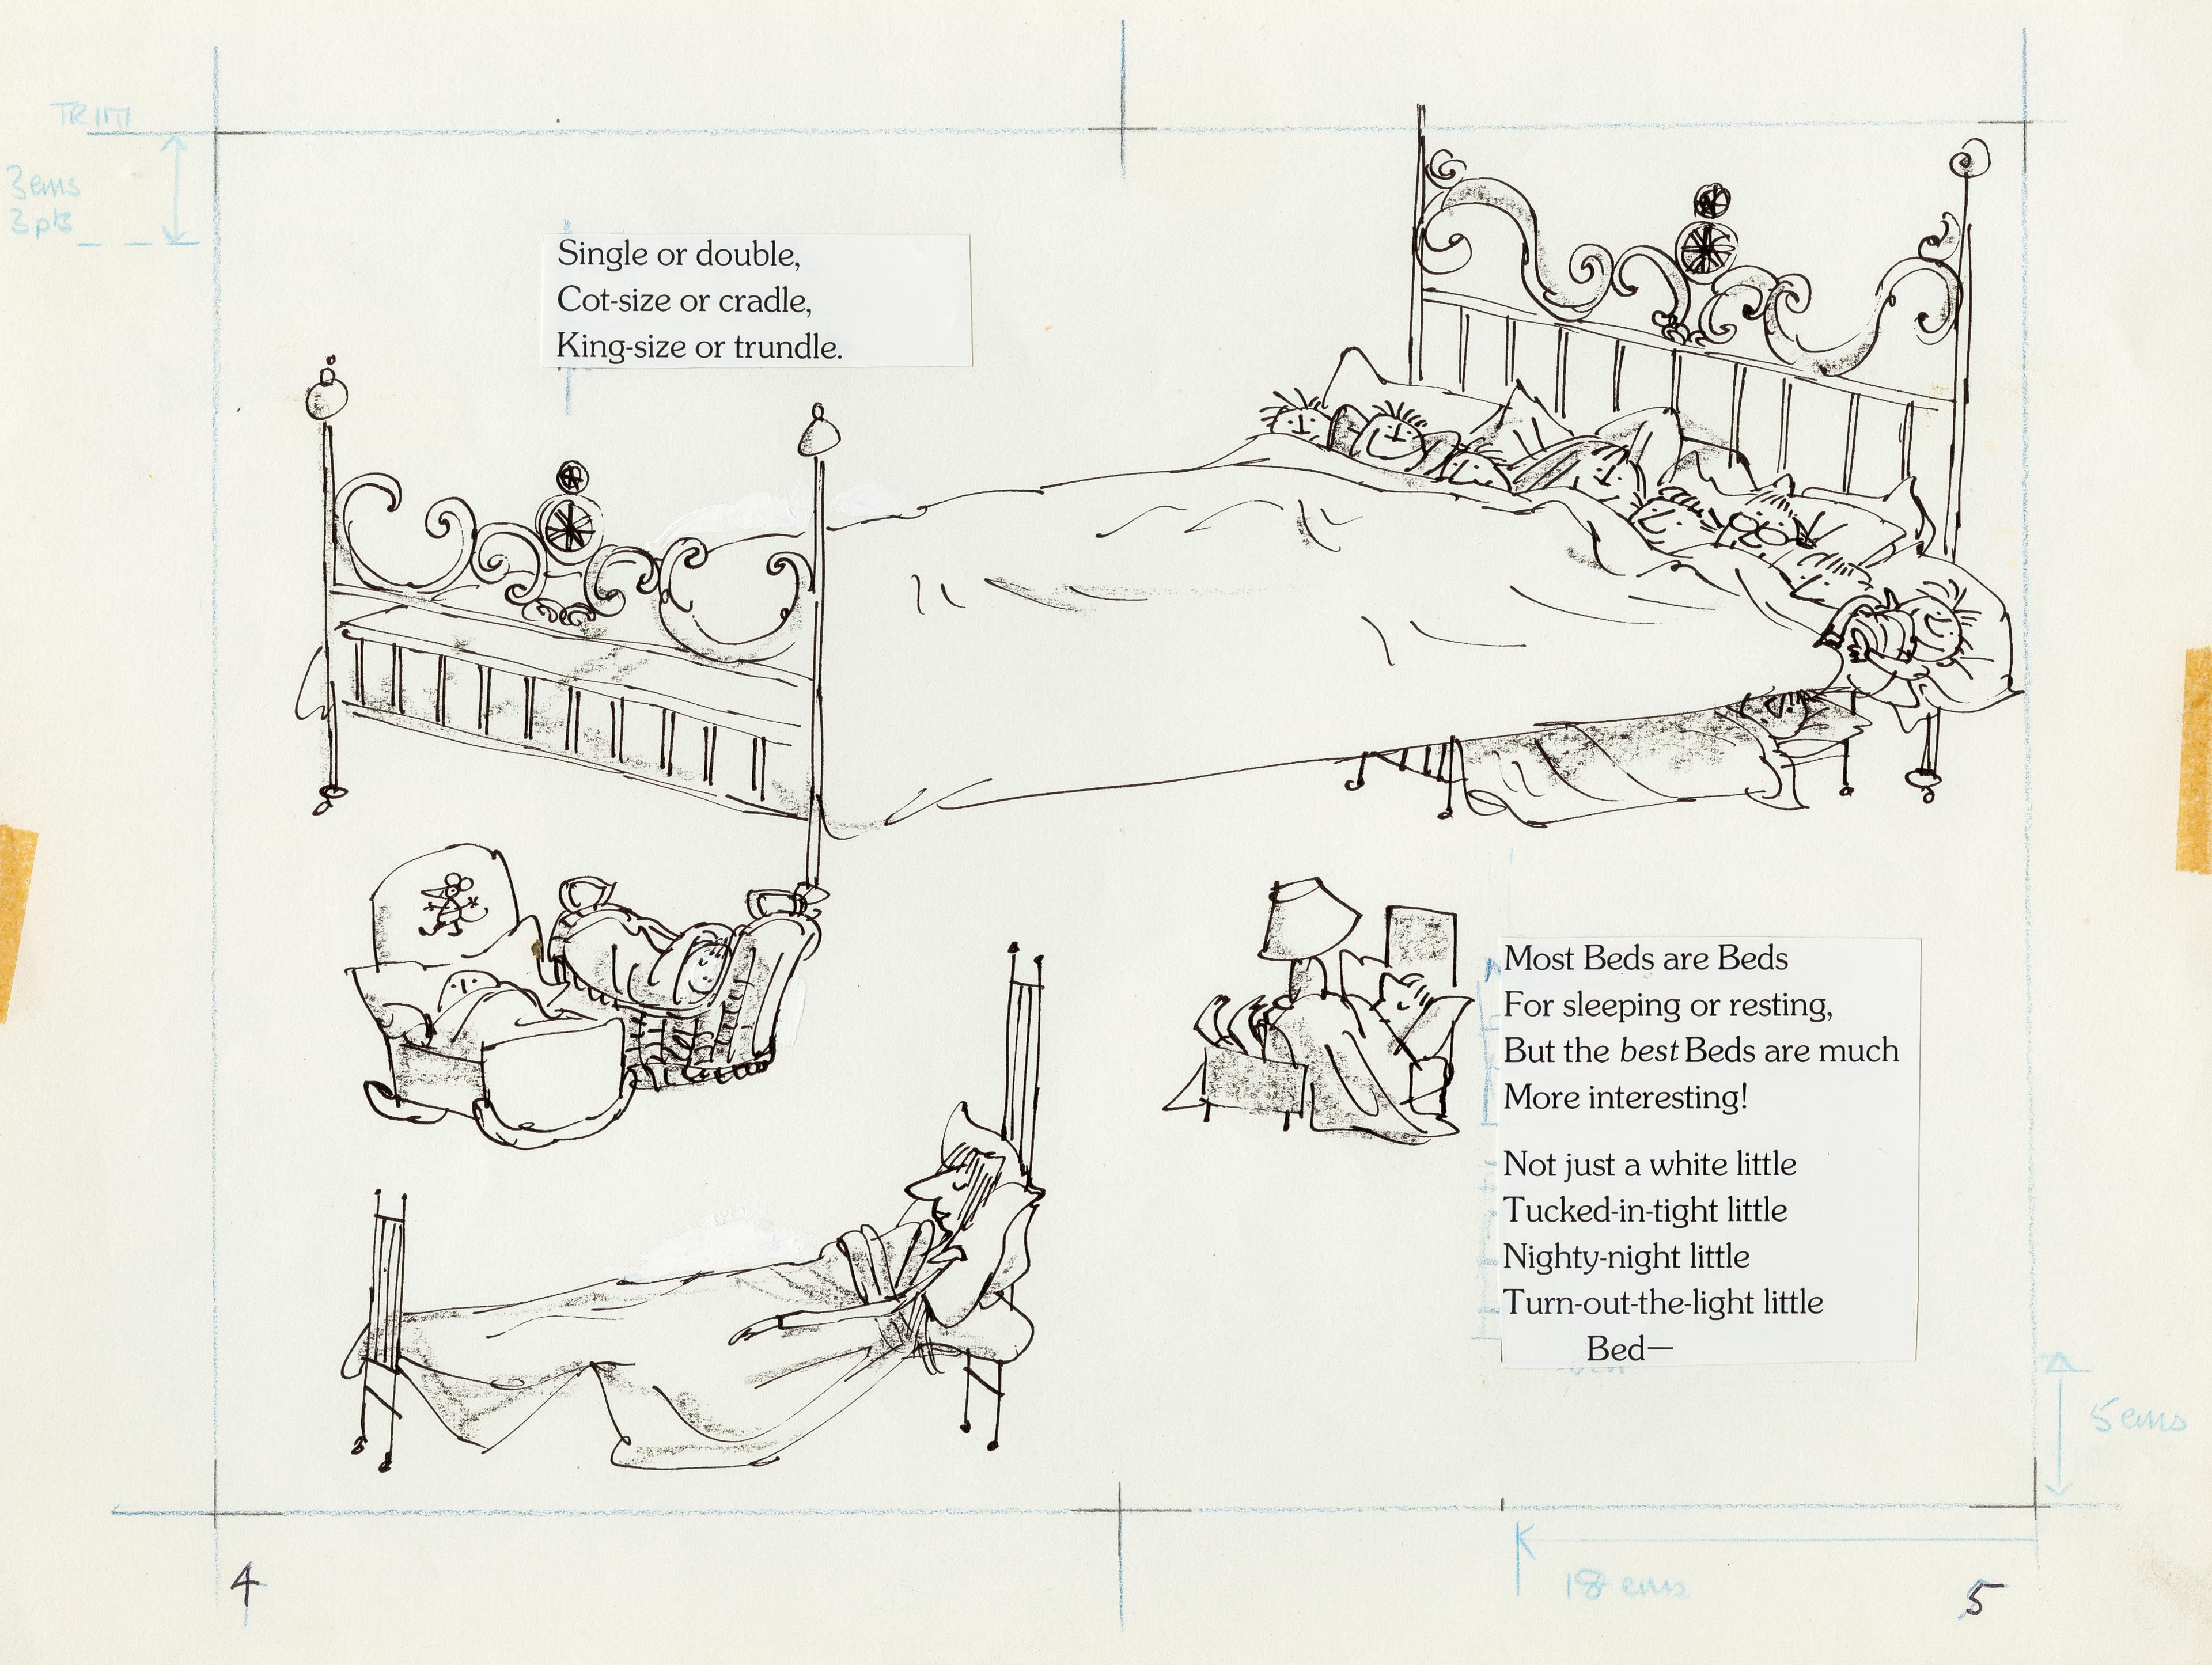 Line drawings of eight people ticked into a large bed with another bed beneath, one person asleep in a long bed and one in a short bed.